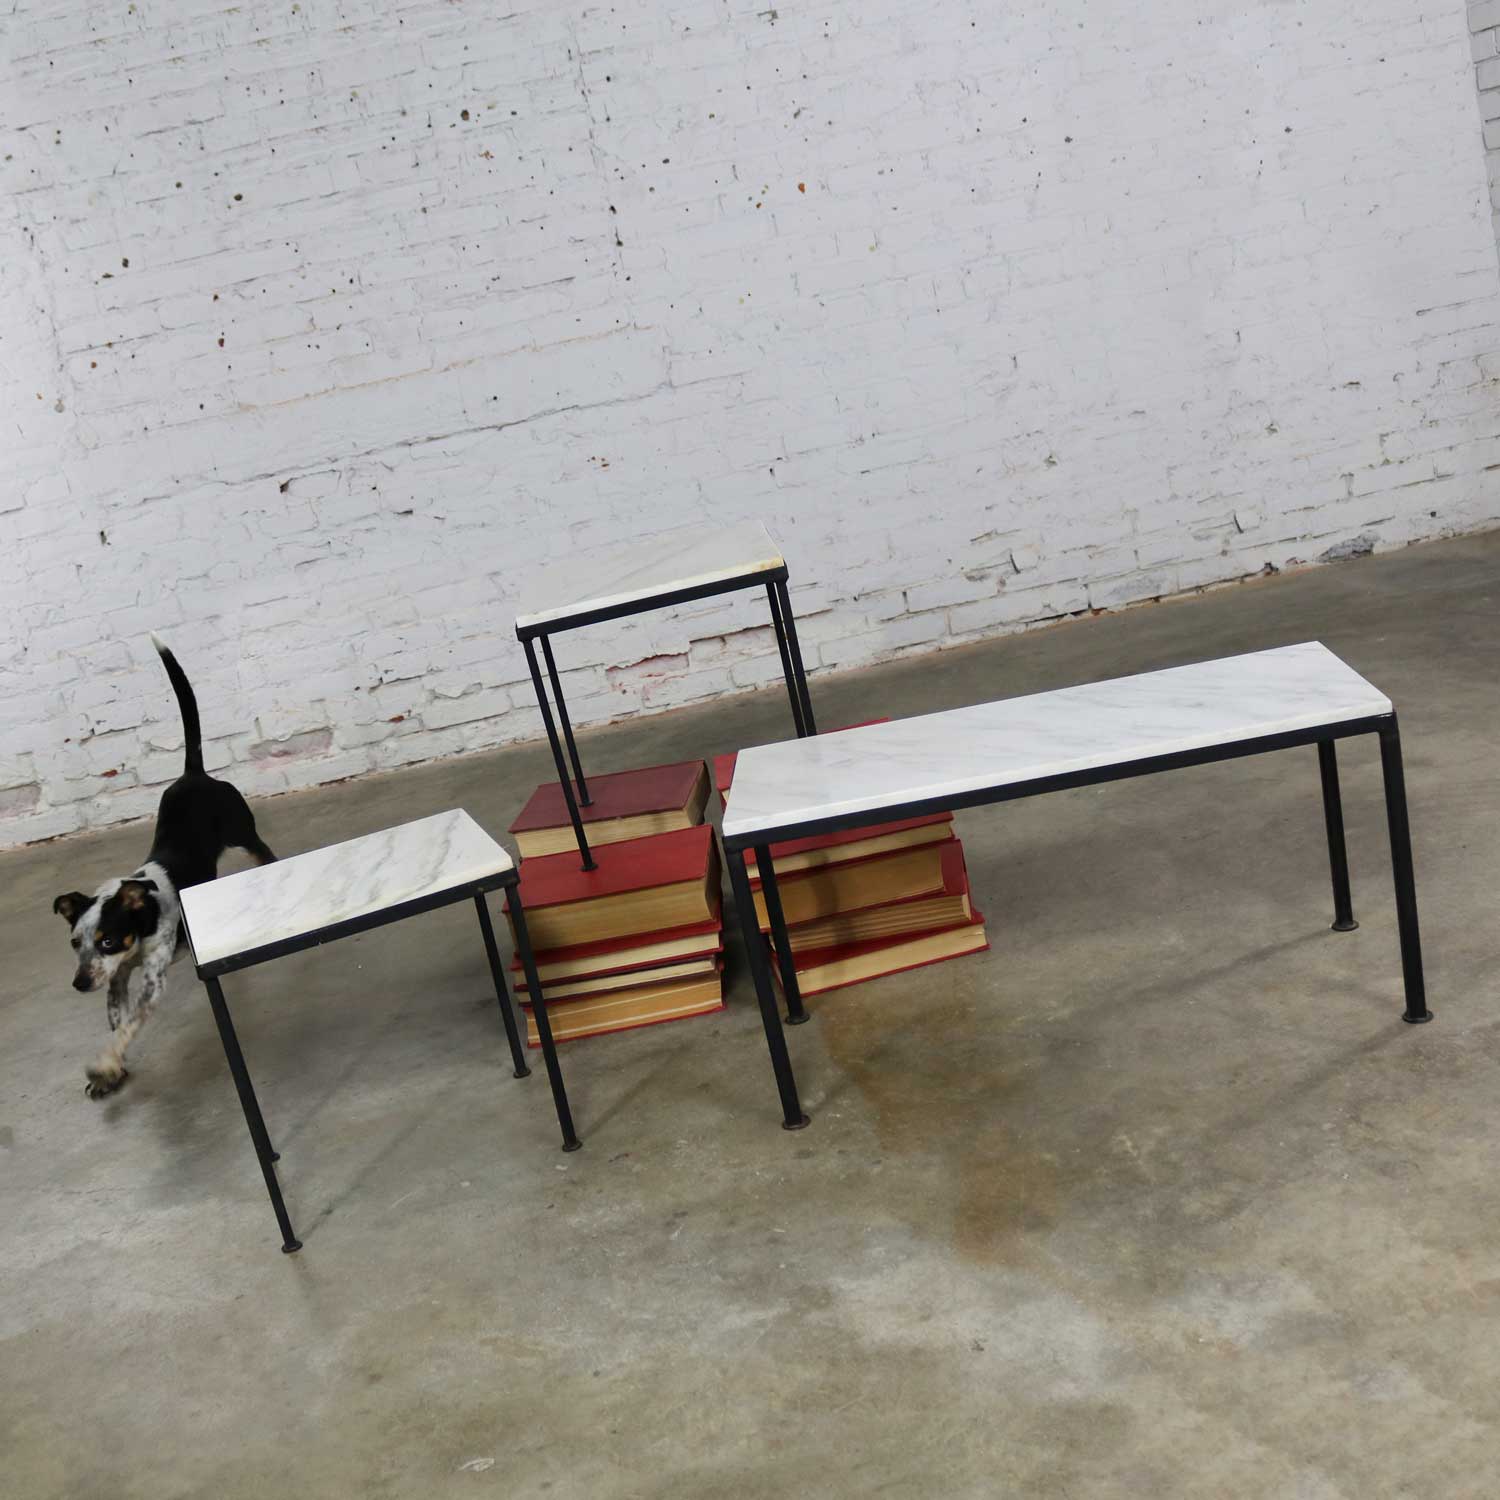 Trio of Small Black Iron Frame White Marble Topped Tables for Indoors or Out